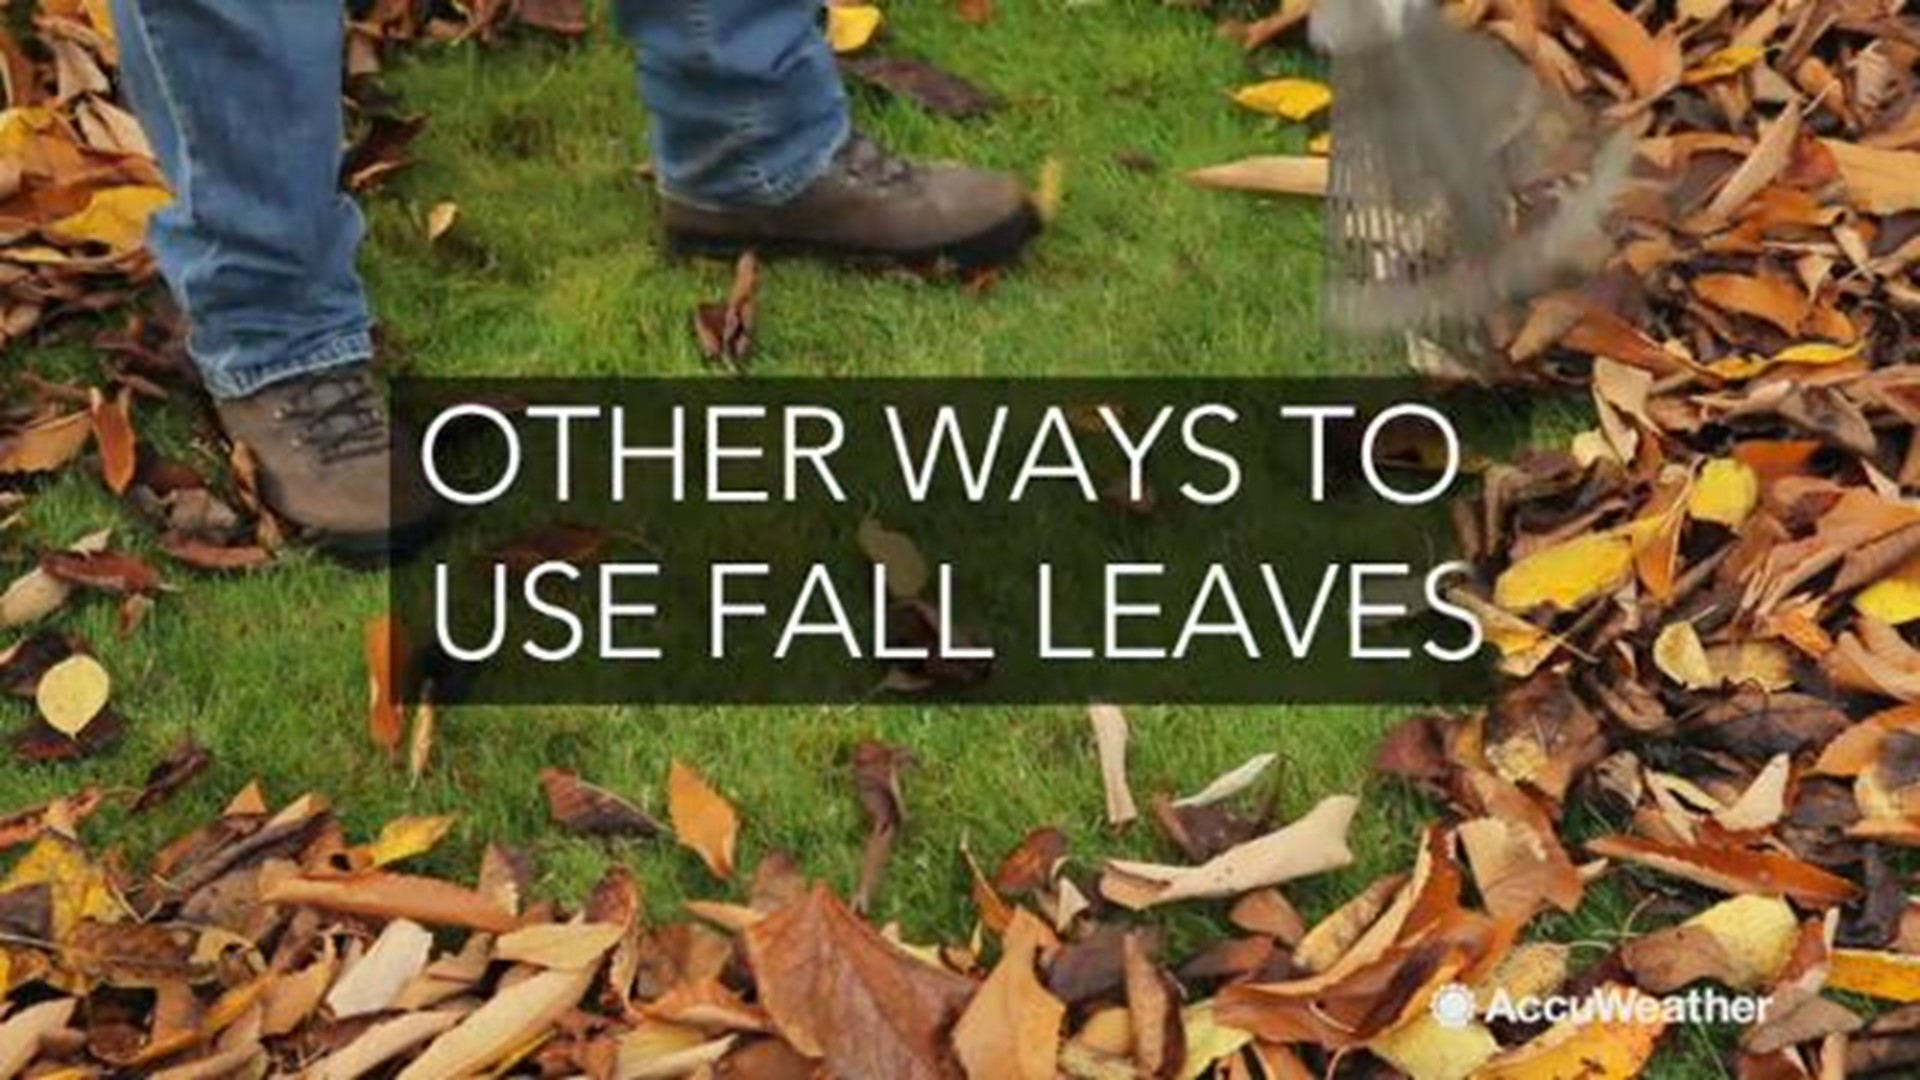 As autumn leaves fall to the ground, you could just rake them up and toss them aside, but leaves have many other uses.